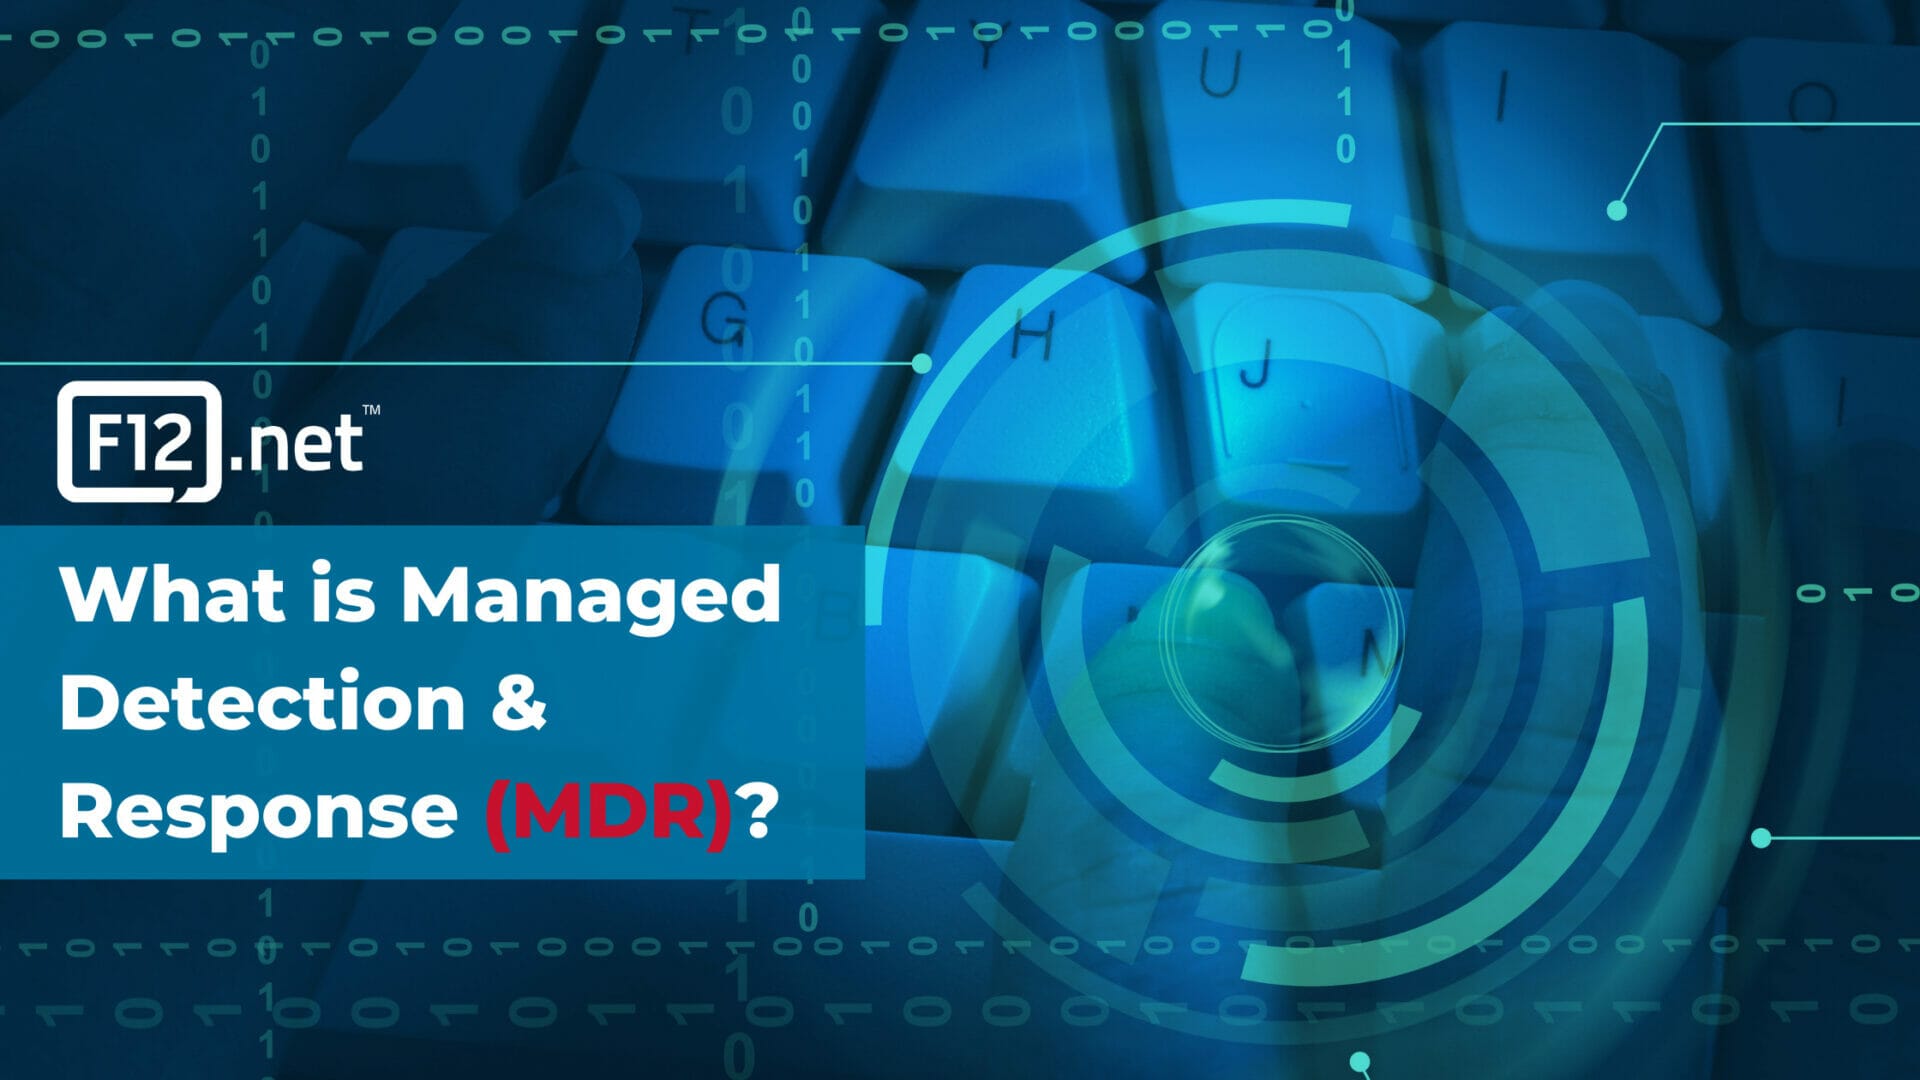 Blue image with keyboard asking "What is Managed Detection & Response (MDR)?